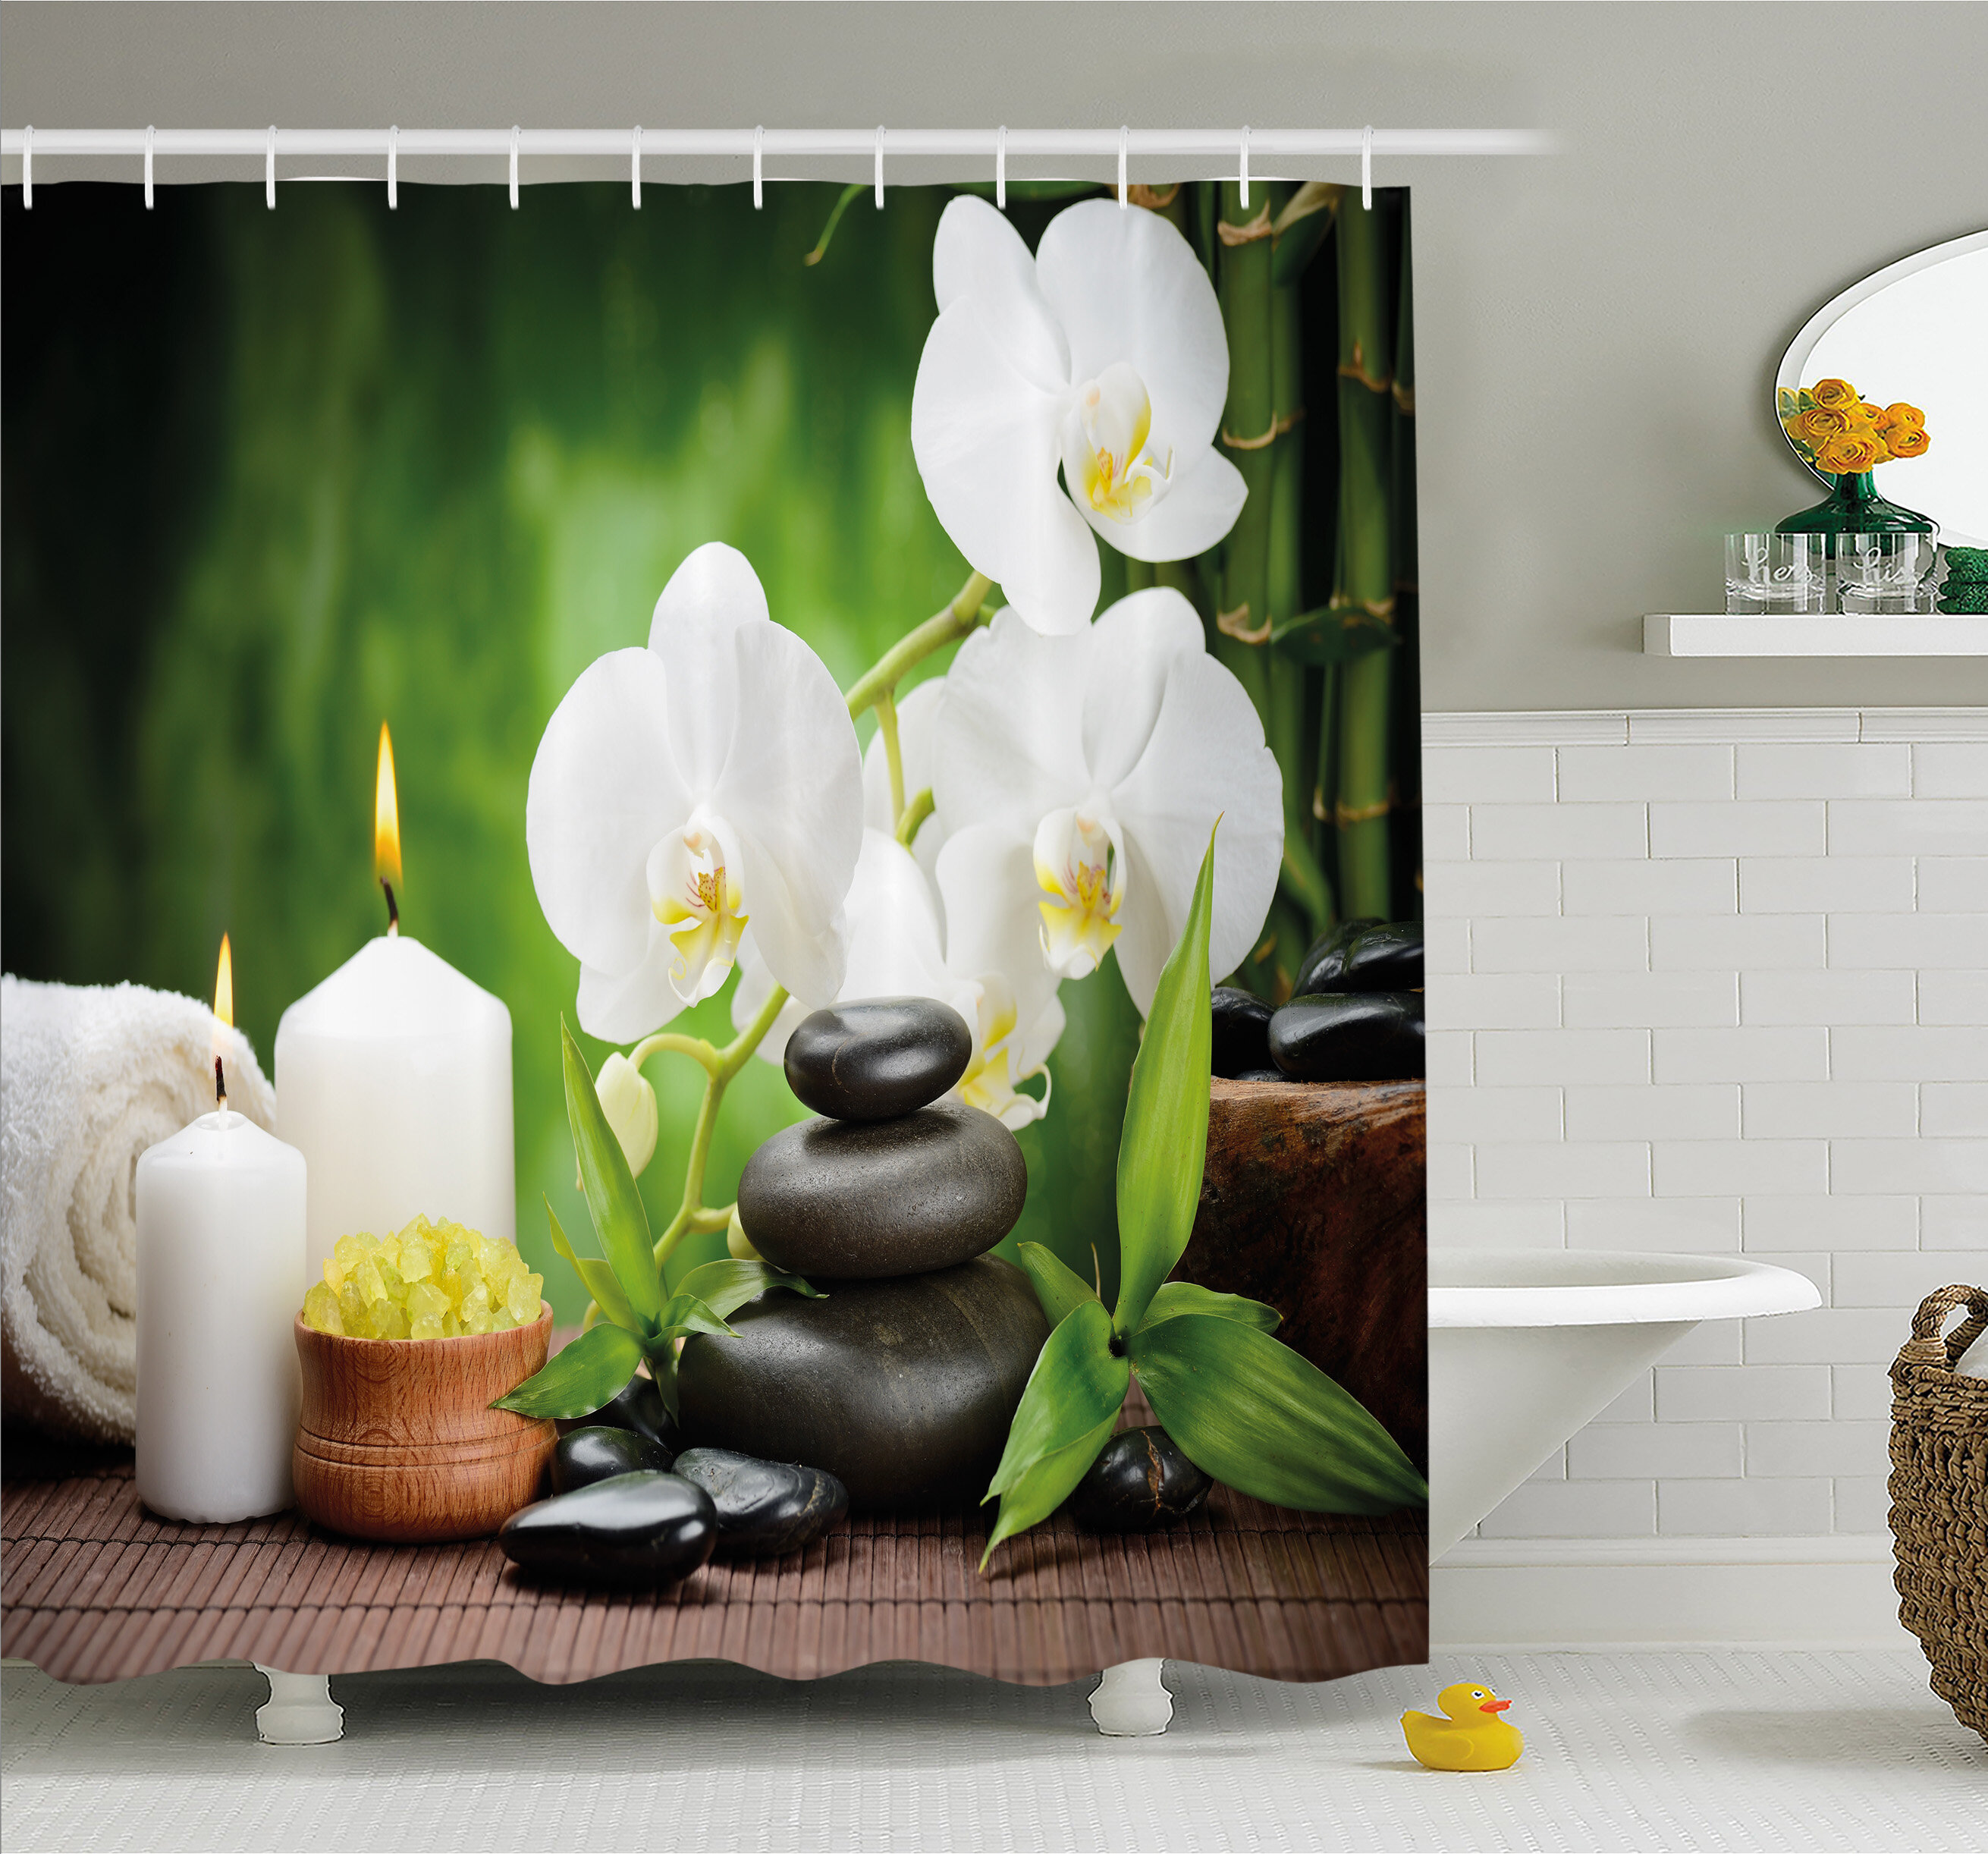 East Urban Home Spa Zen Stones With Orchid And Candles Plants At The Background Shower Curtain Set Wayfair